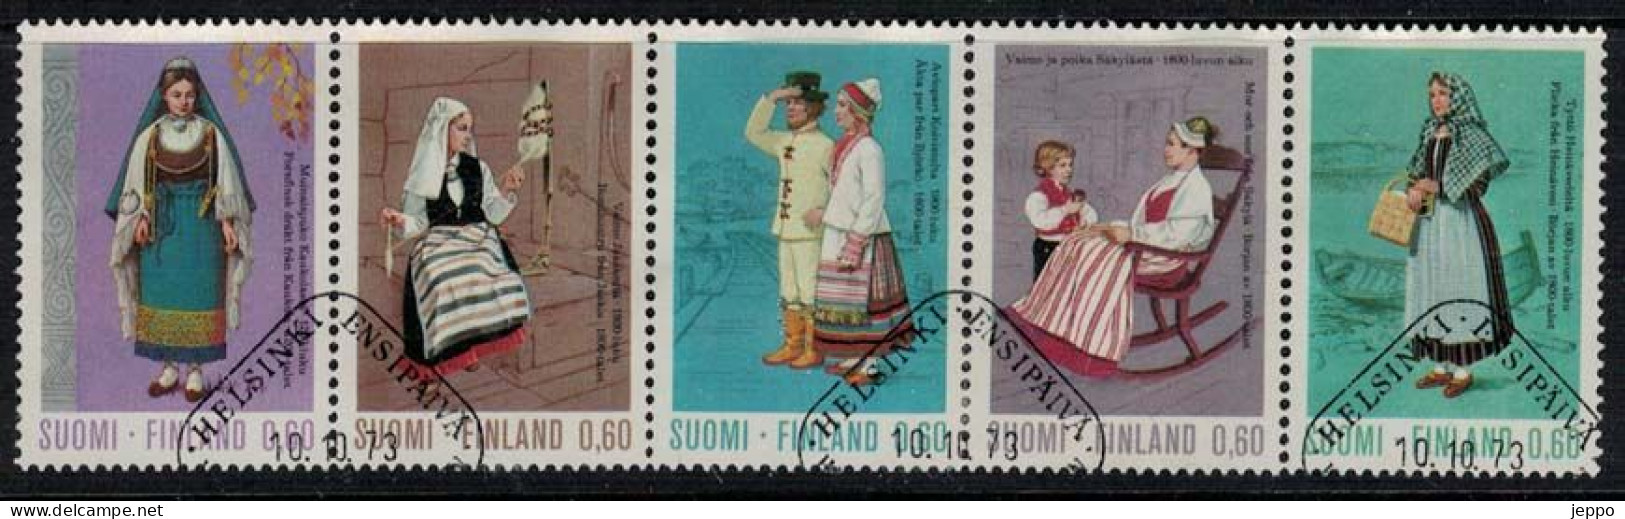 1973 Finland, National Costumes 5-strip FD Stamped. - Used Stamps